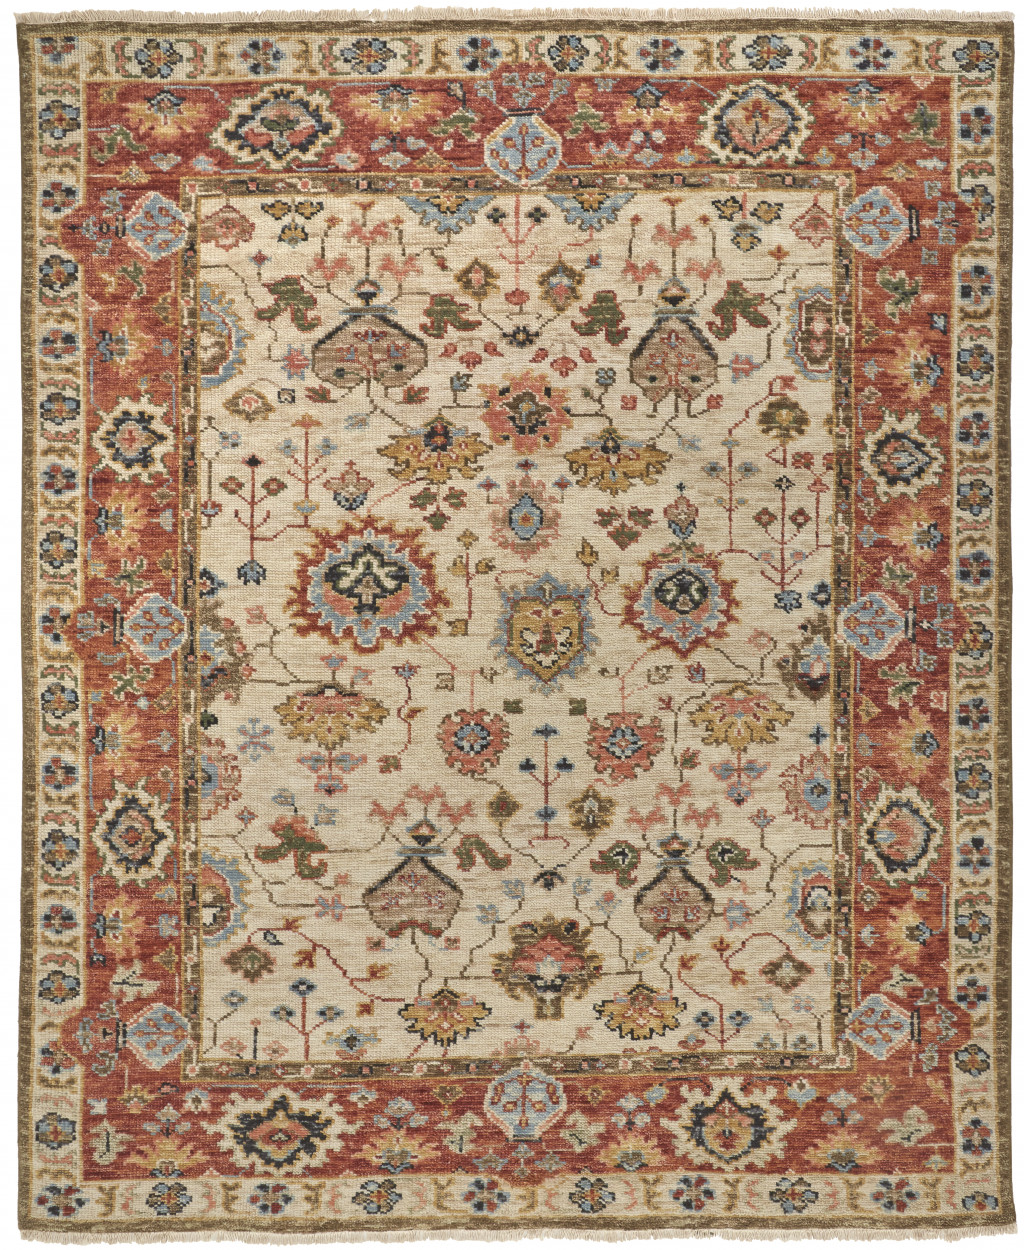 10' X 13' Ivory Red And Blue Wool Floral Hand Knotted Stain Resistant Area Rug-512656-1